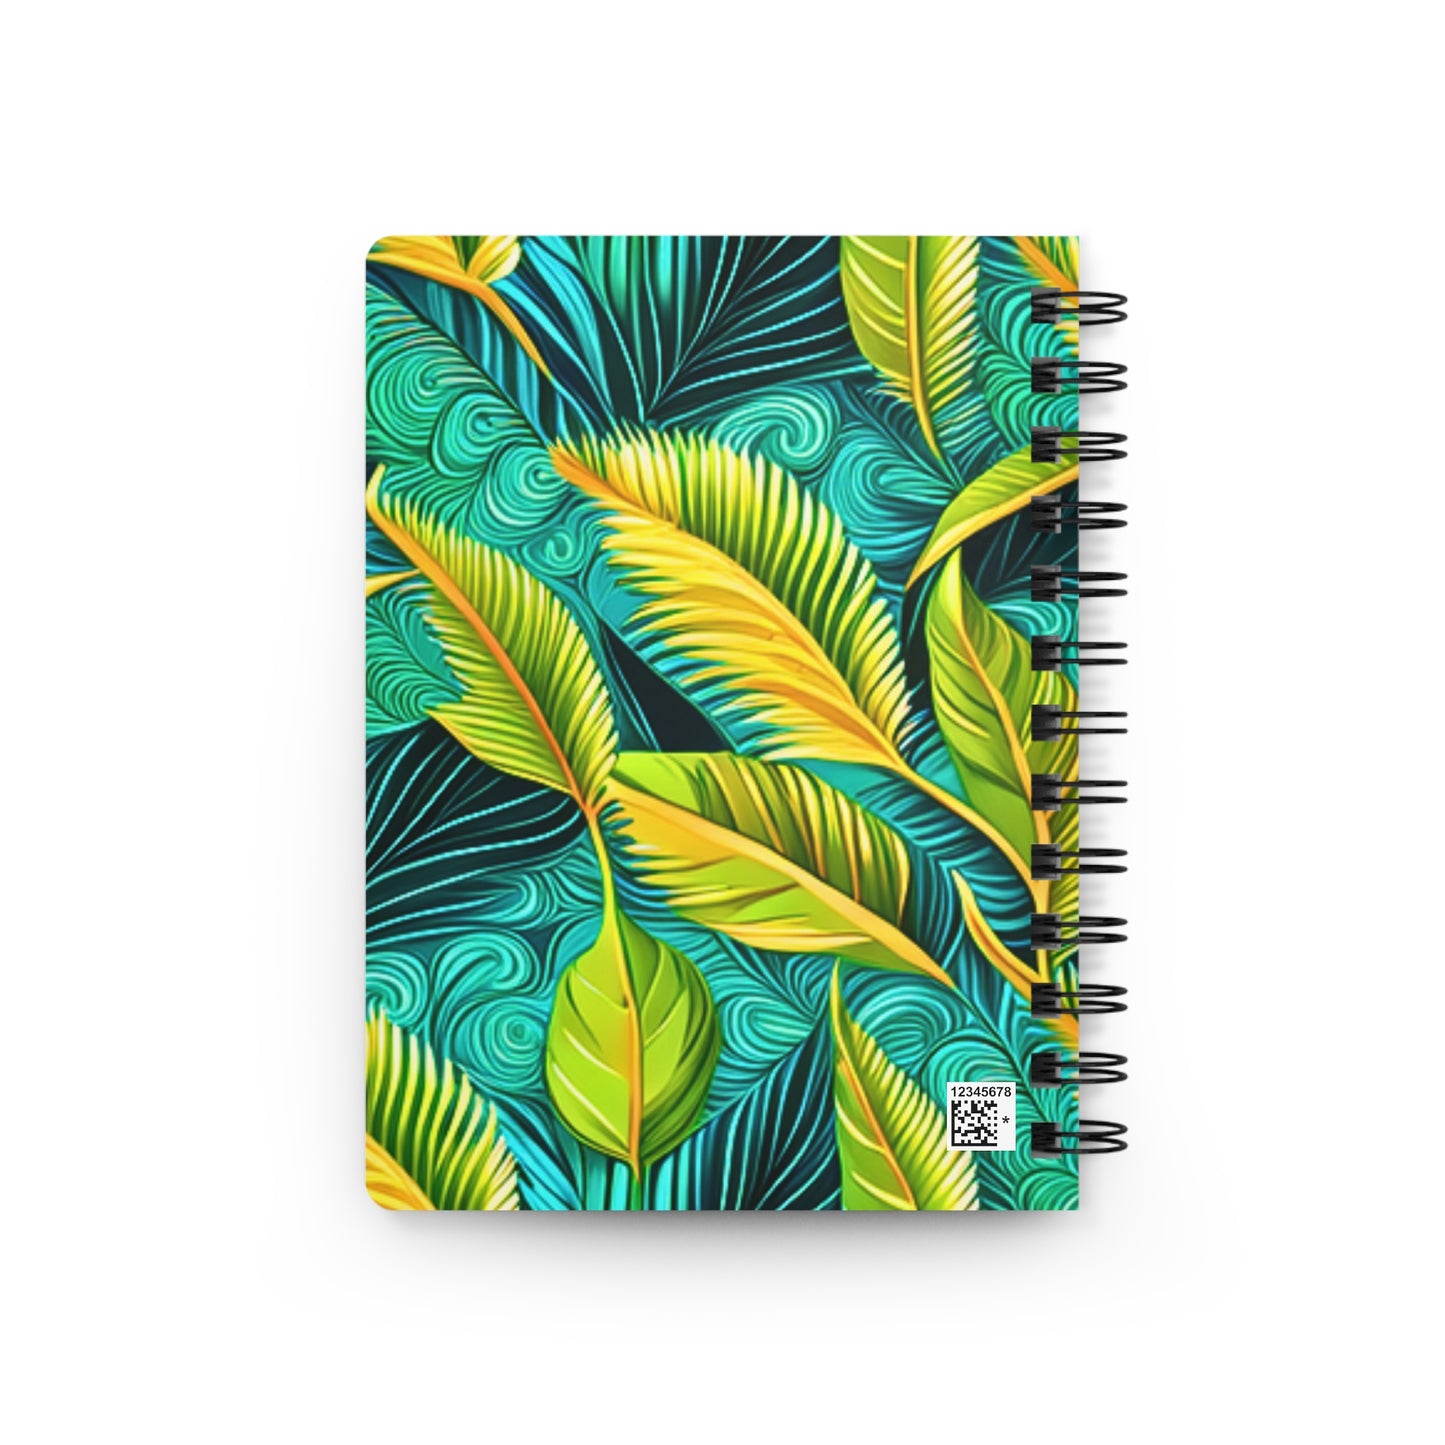 Madagascar Tropical Forest Palms Indian Ocean Africa Travel Sketch Writing Spiral Bound Journal